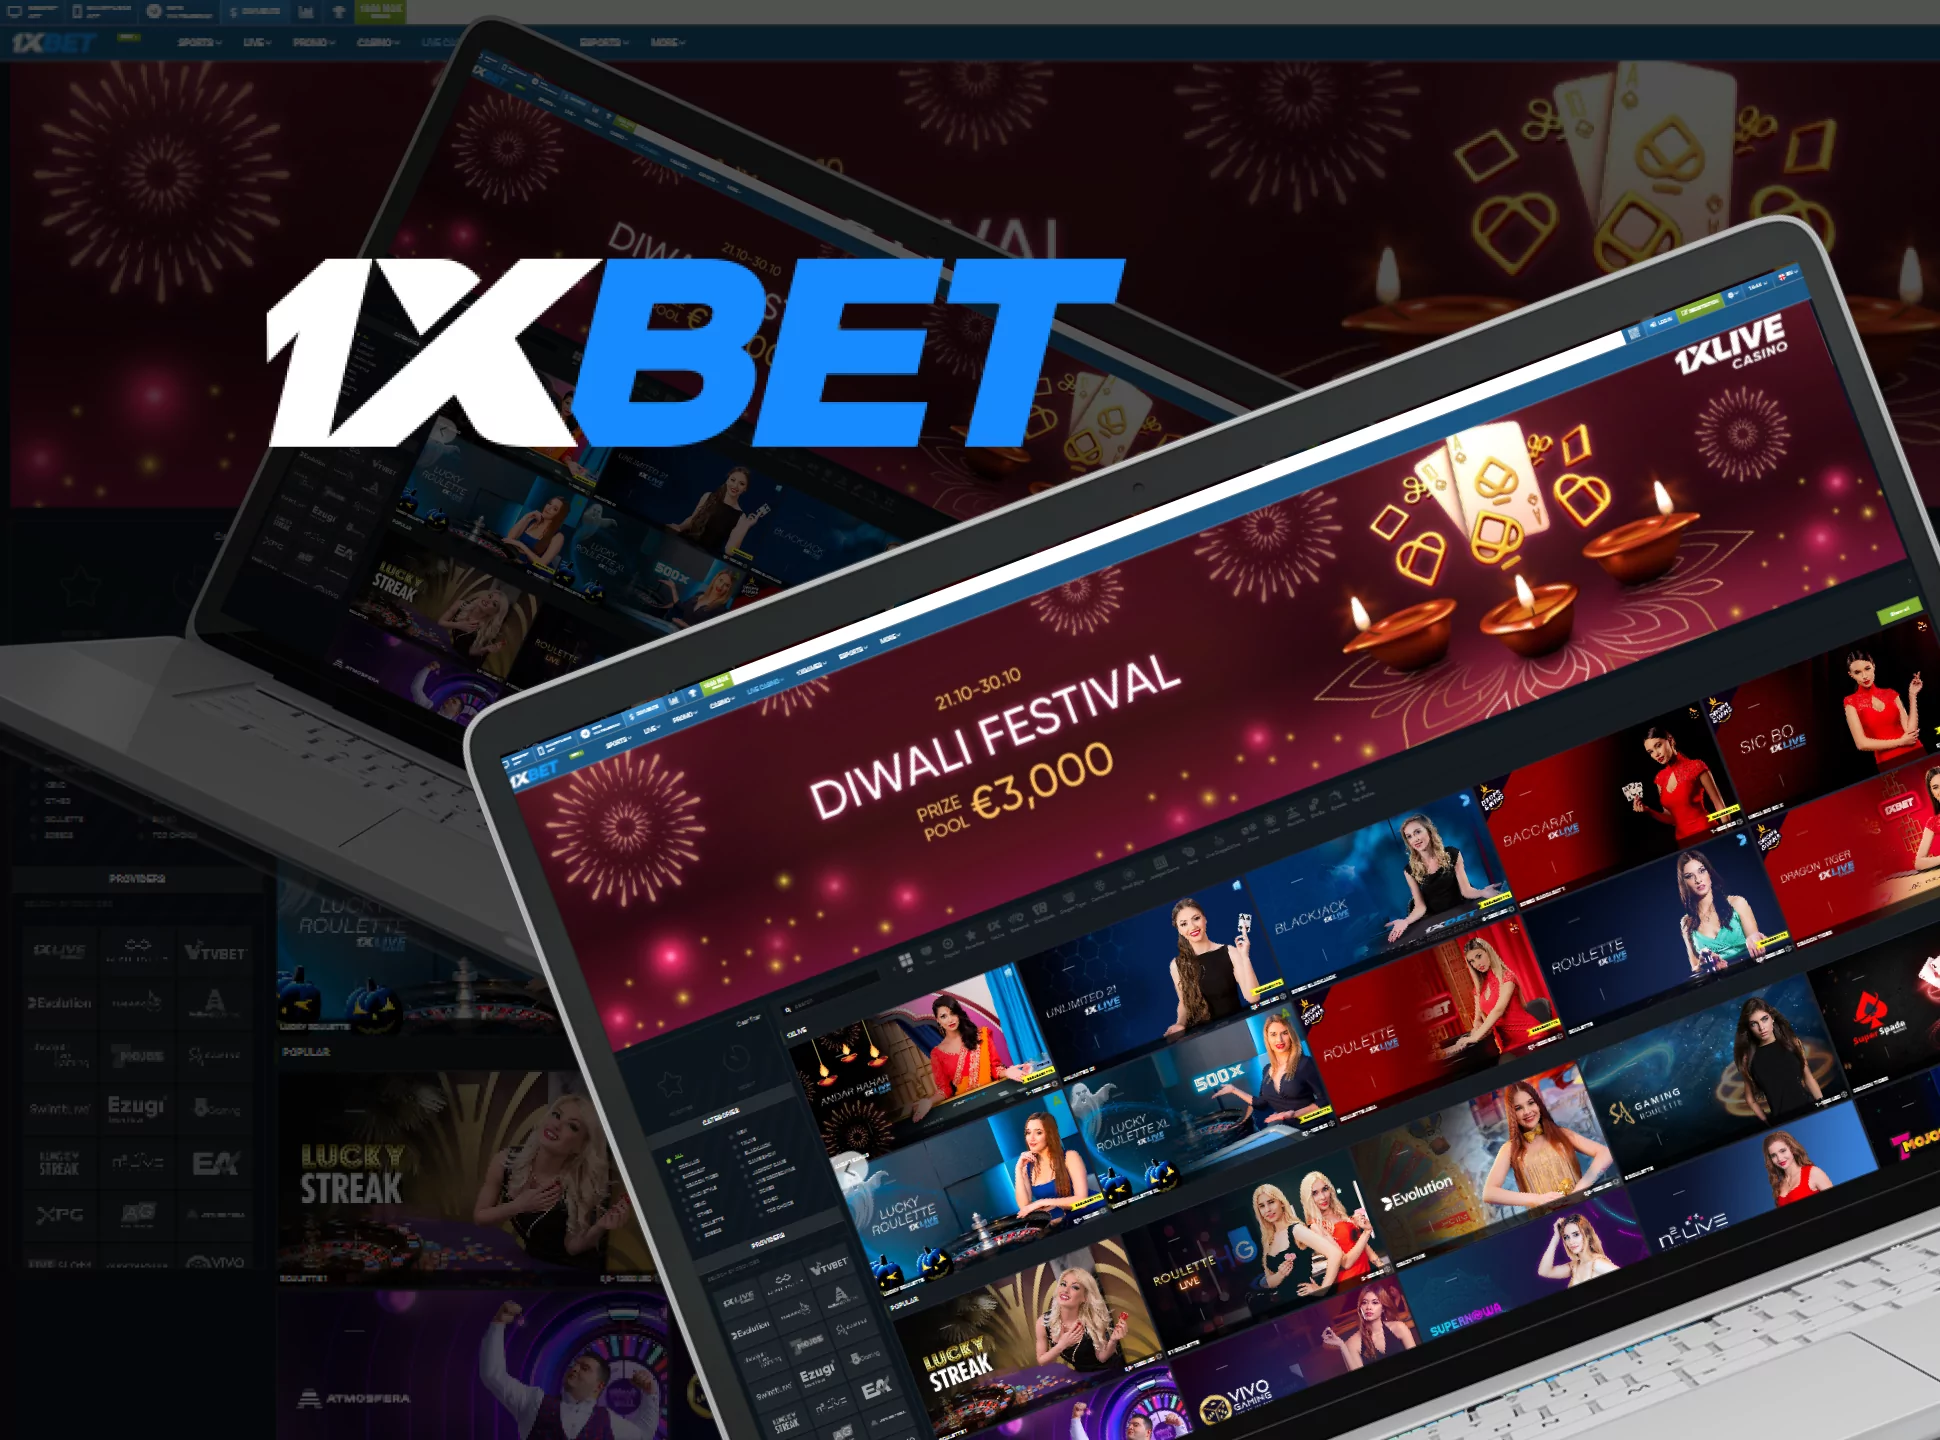 1xBet casino gives up to 10,000 BDT for its new gamers.